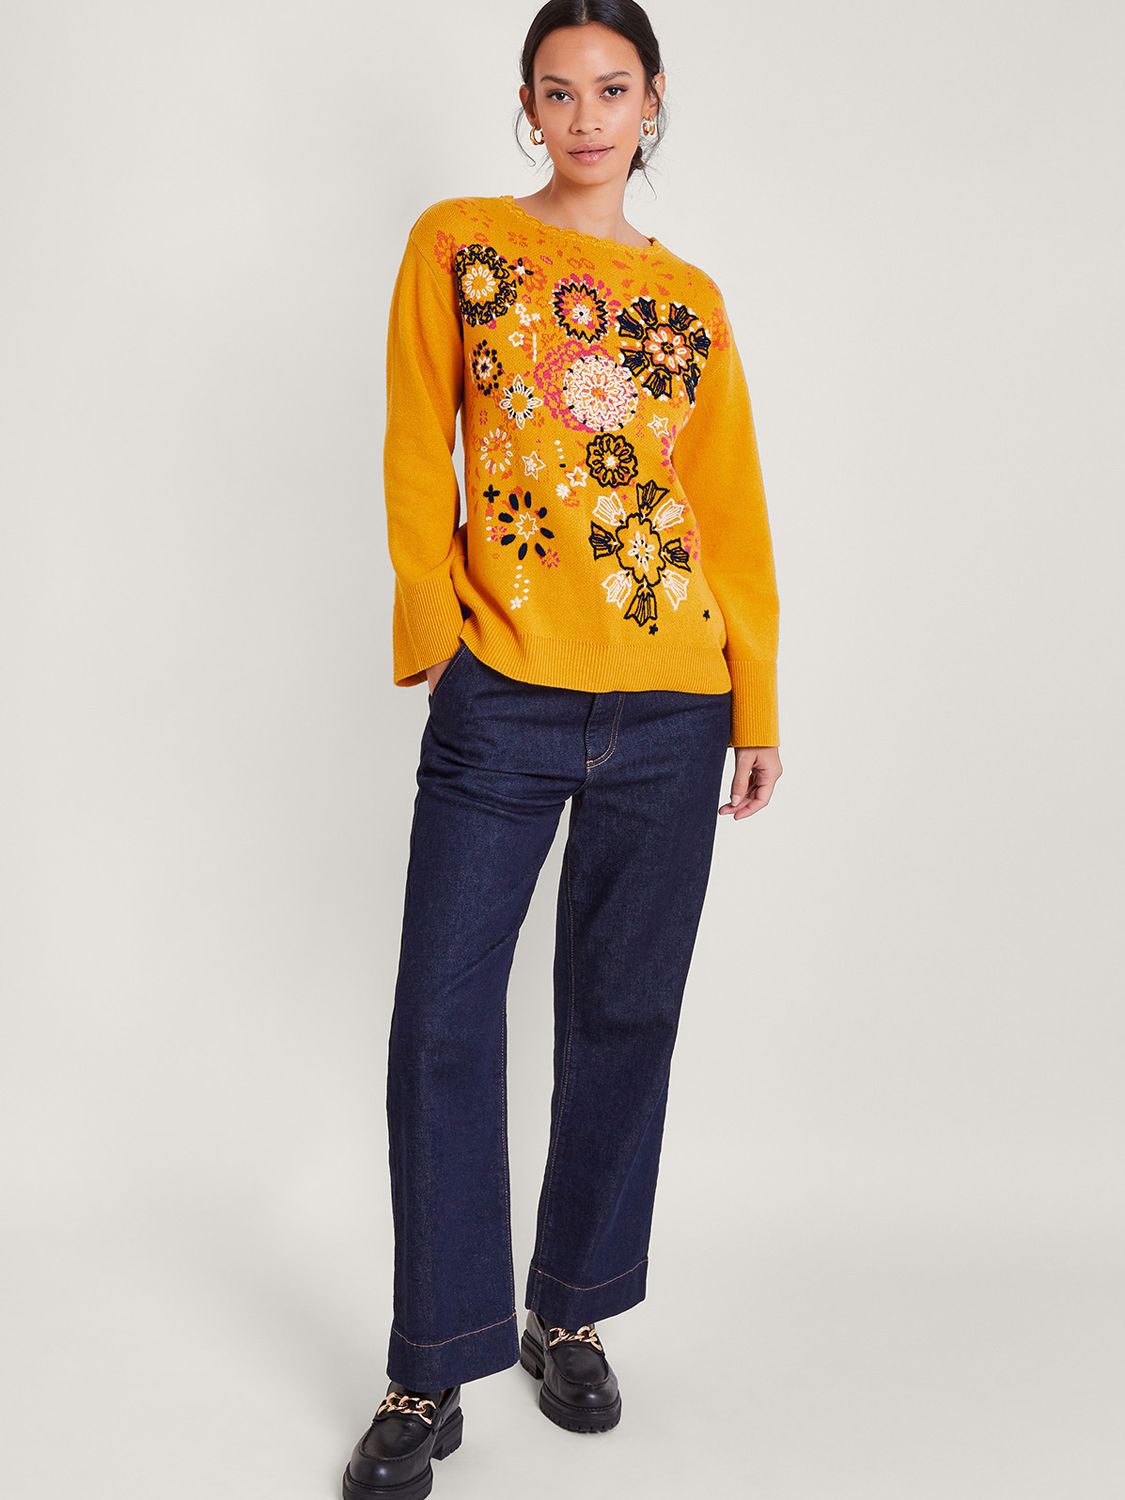 Monsoon Floral Embroidered Jumper, Ochre at John Lewis & Partners